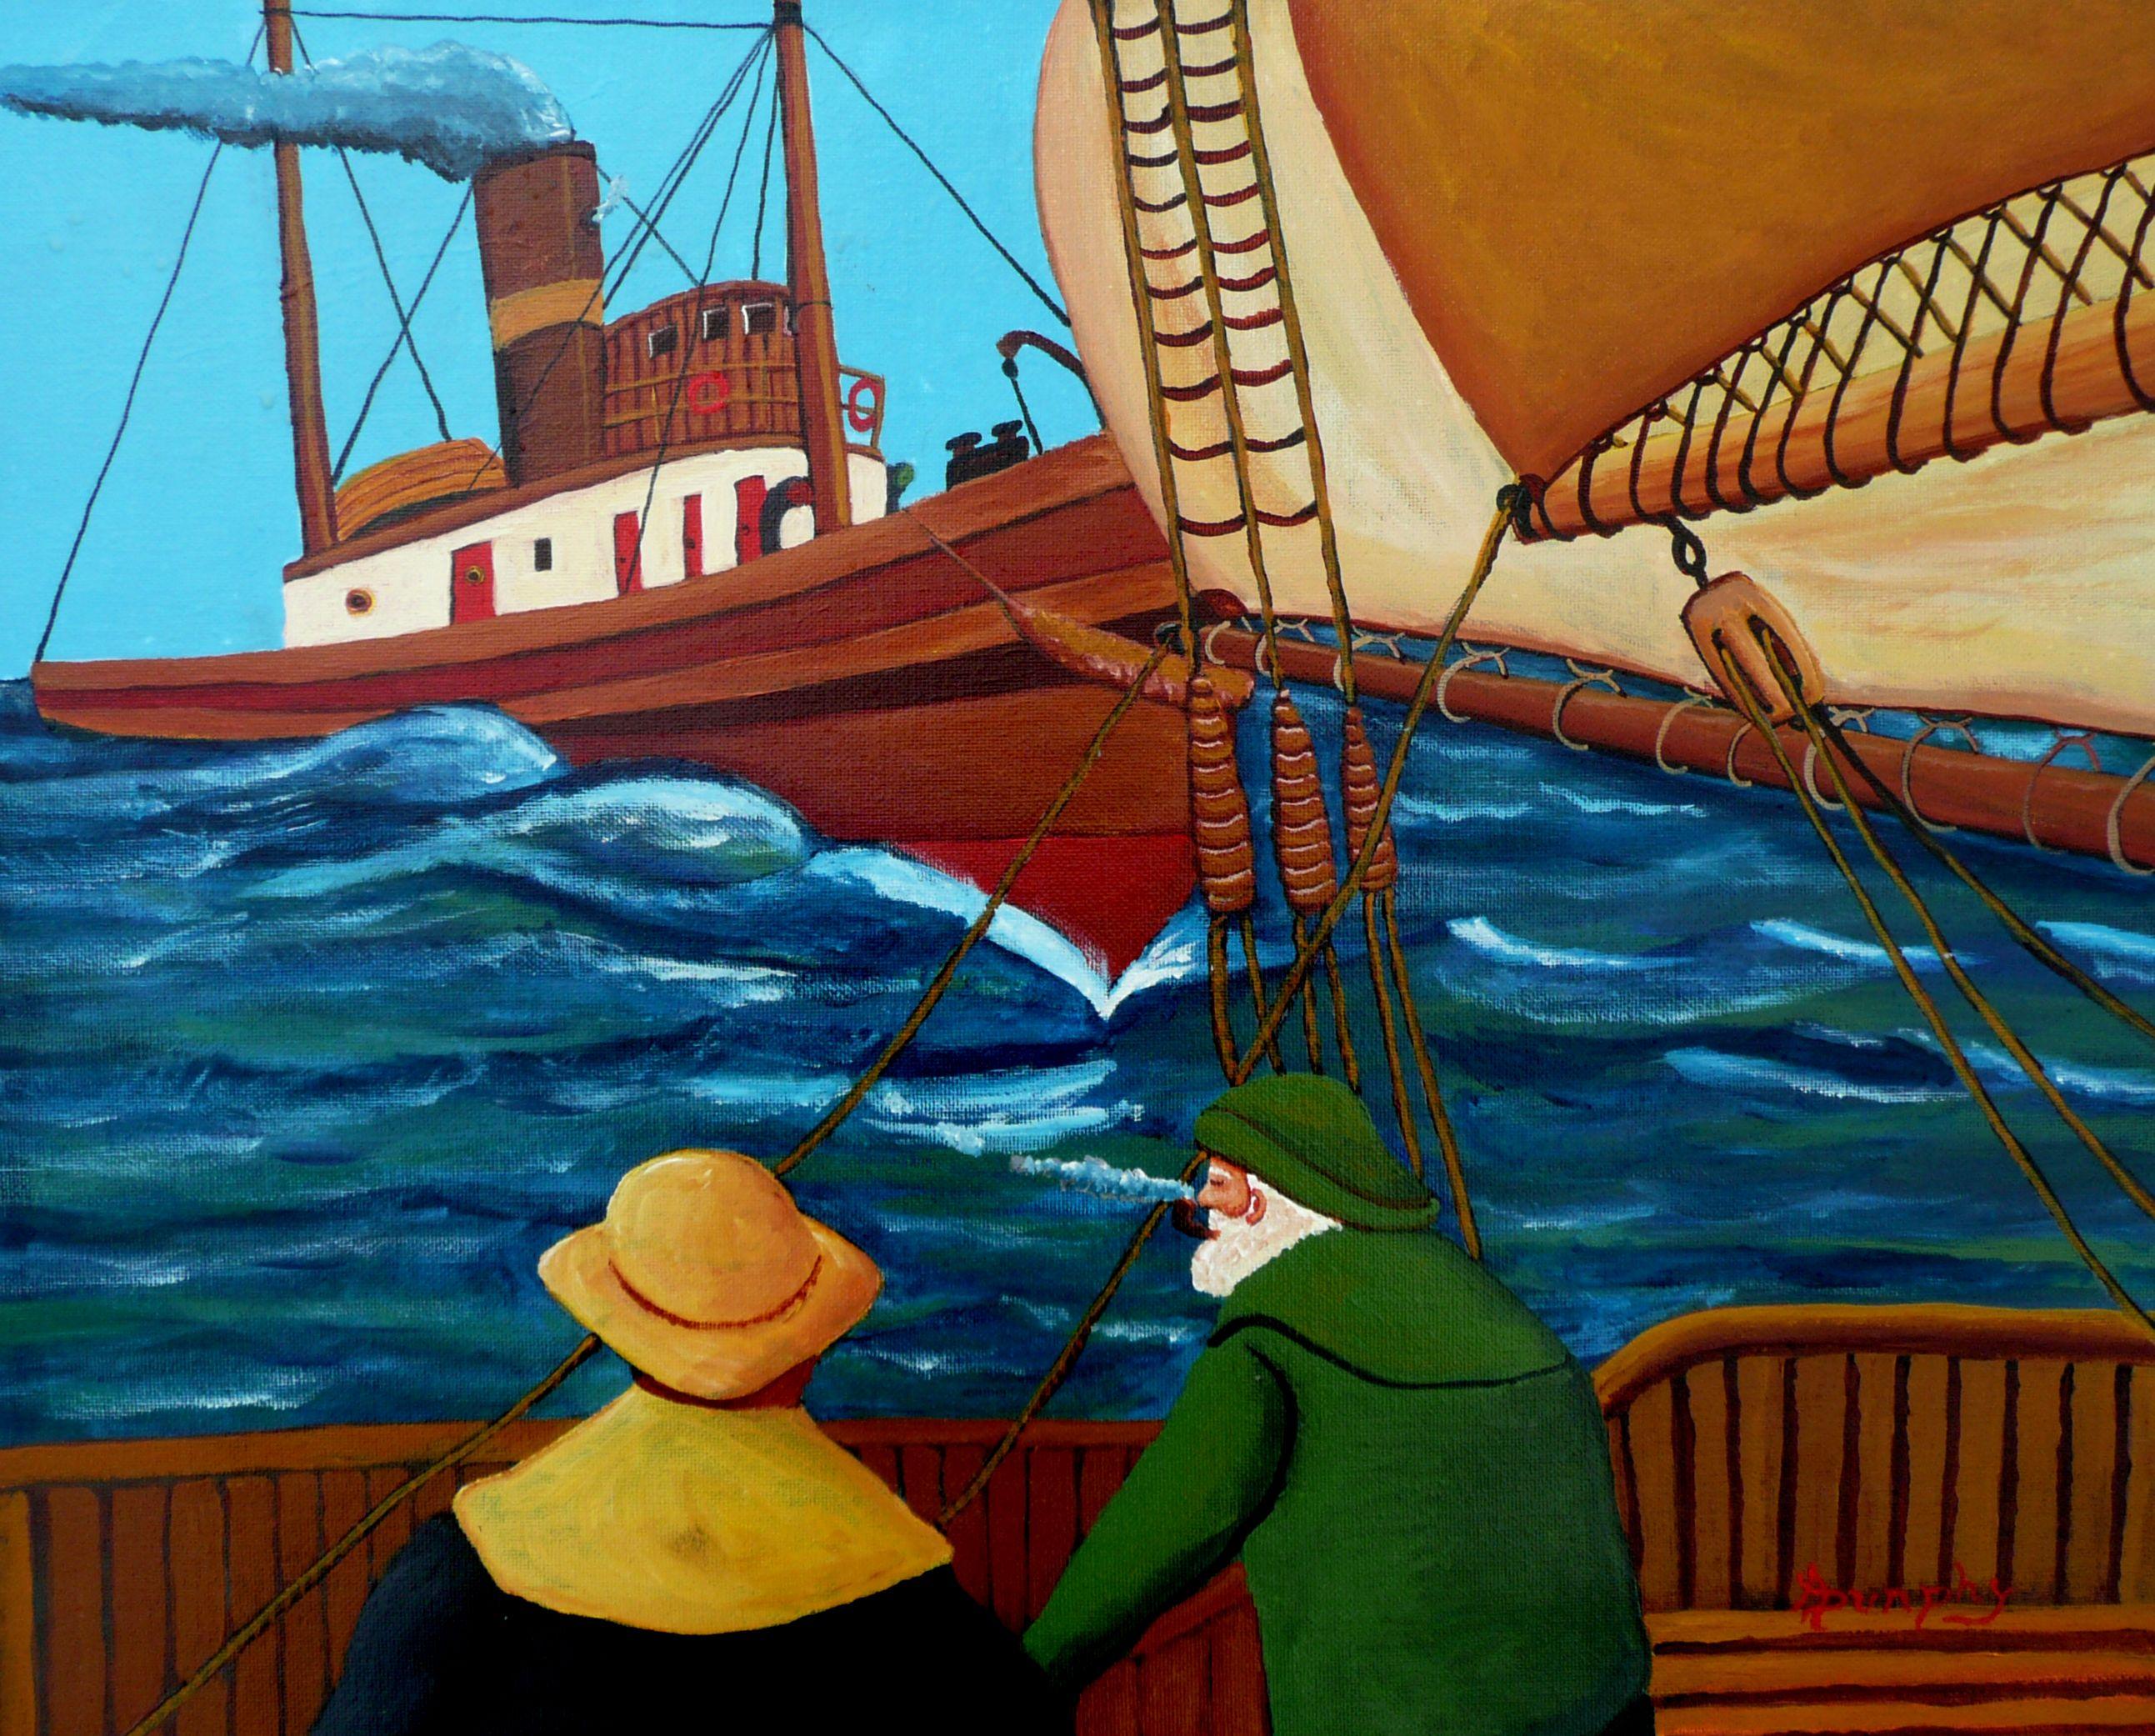 Two ships, one a sailing vessel and the other a steam ship meet on the ocean and move within hailing distance to speak to each other in a time before radio communication. This sea painting has been created using professional grade acrylics on